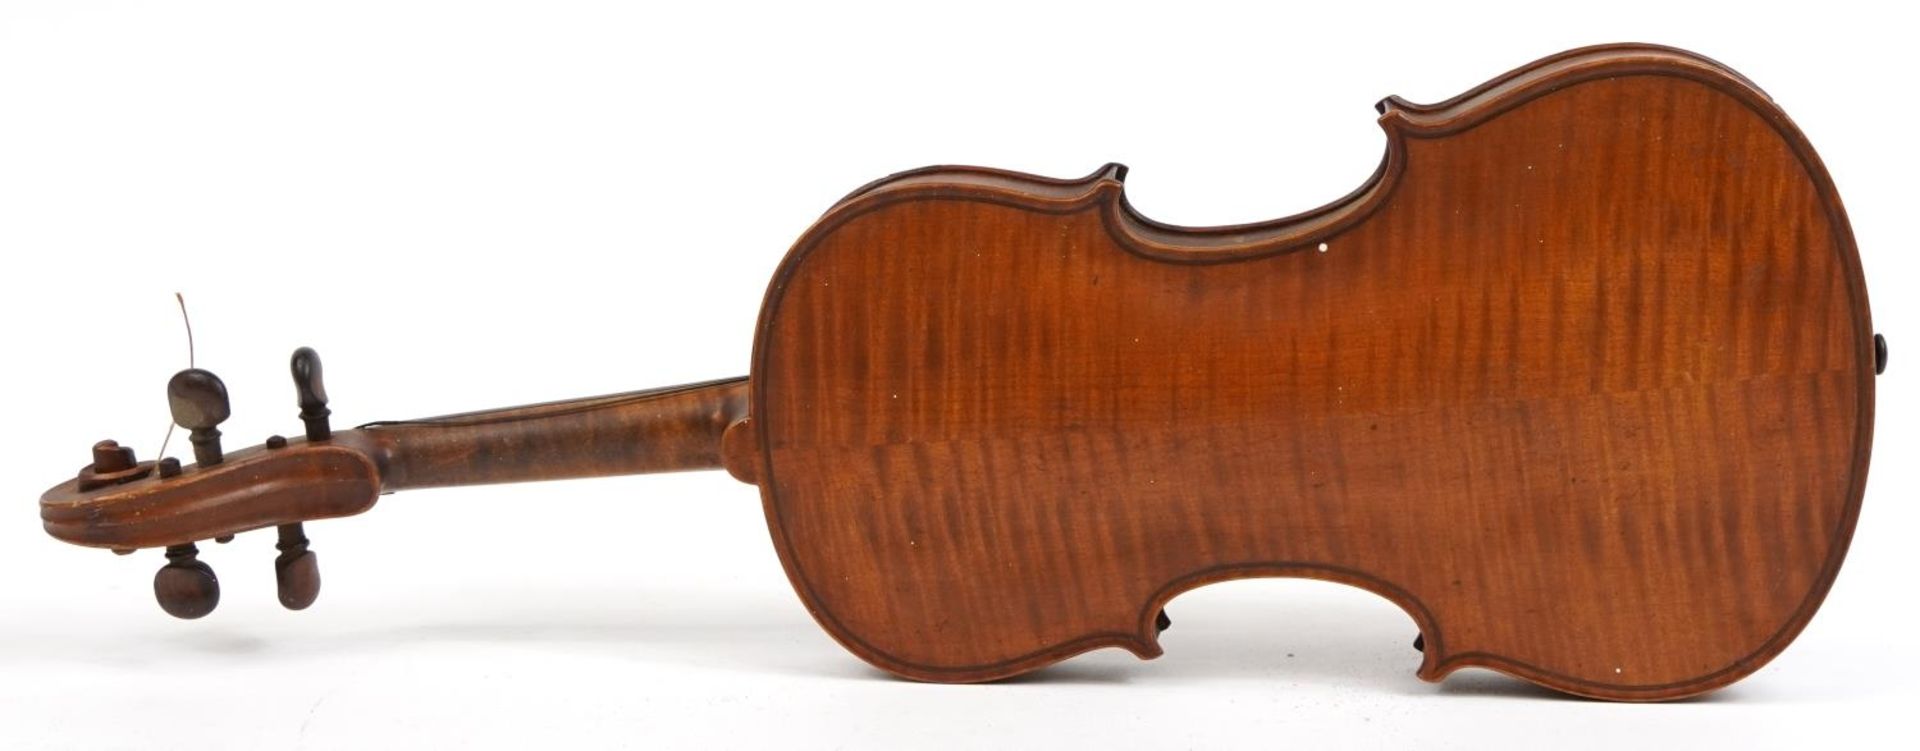 Old wooden violin with scrolled neck, the violin back 14 inches in length - Image 2 of 2